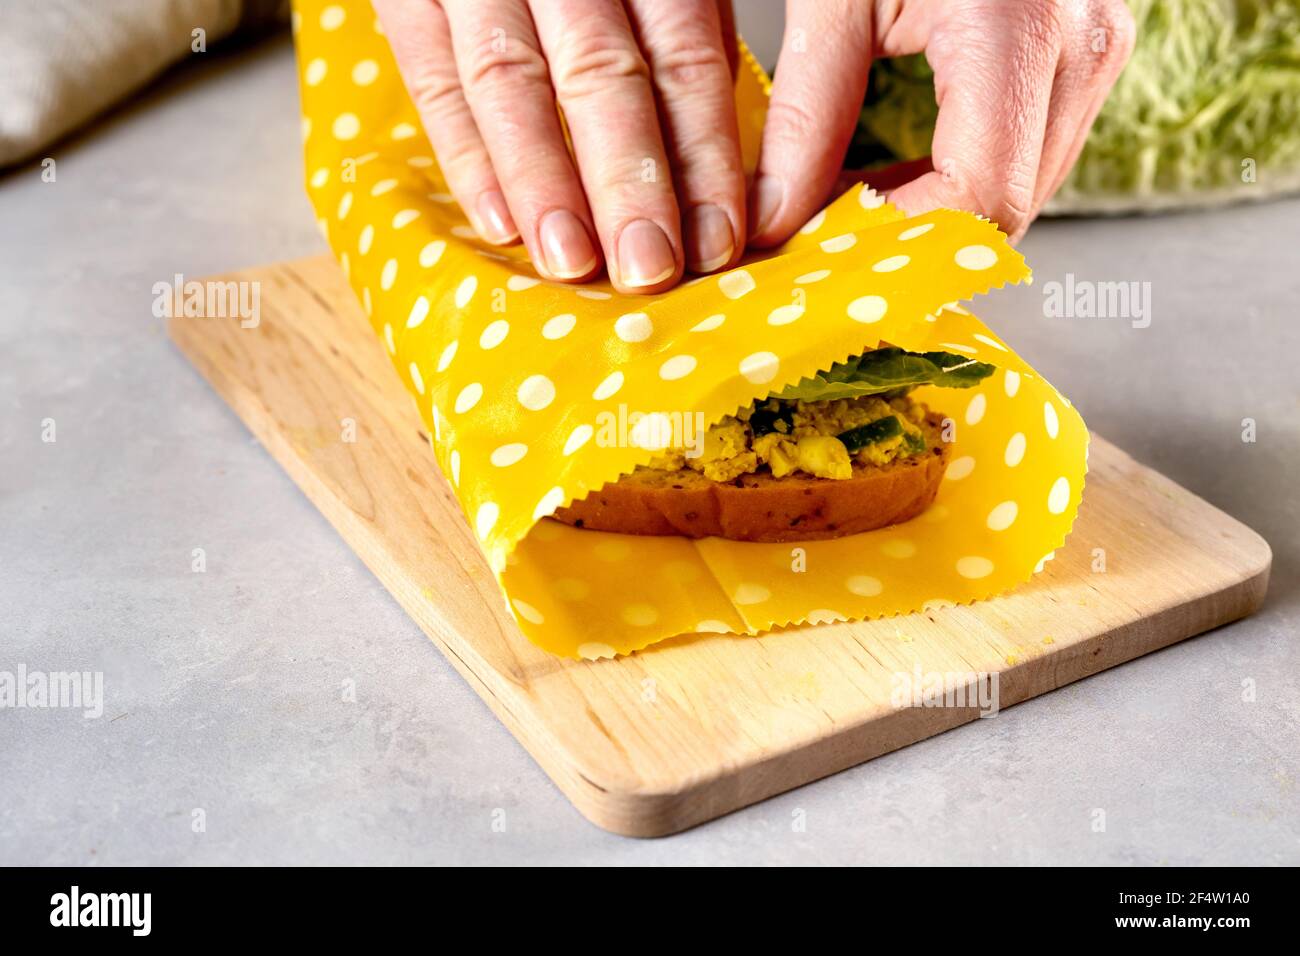 https://c8.alamy.com/comp/2F4W1A0/woman-hands-wrapping-a-healthy-sandwich-in-beeswax-food-wrap-and-cotton-bag-2F4W1A0.jpg